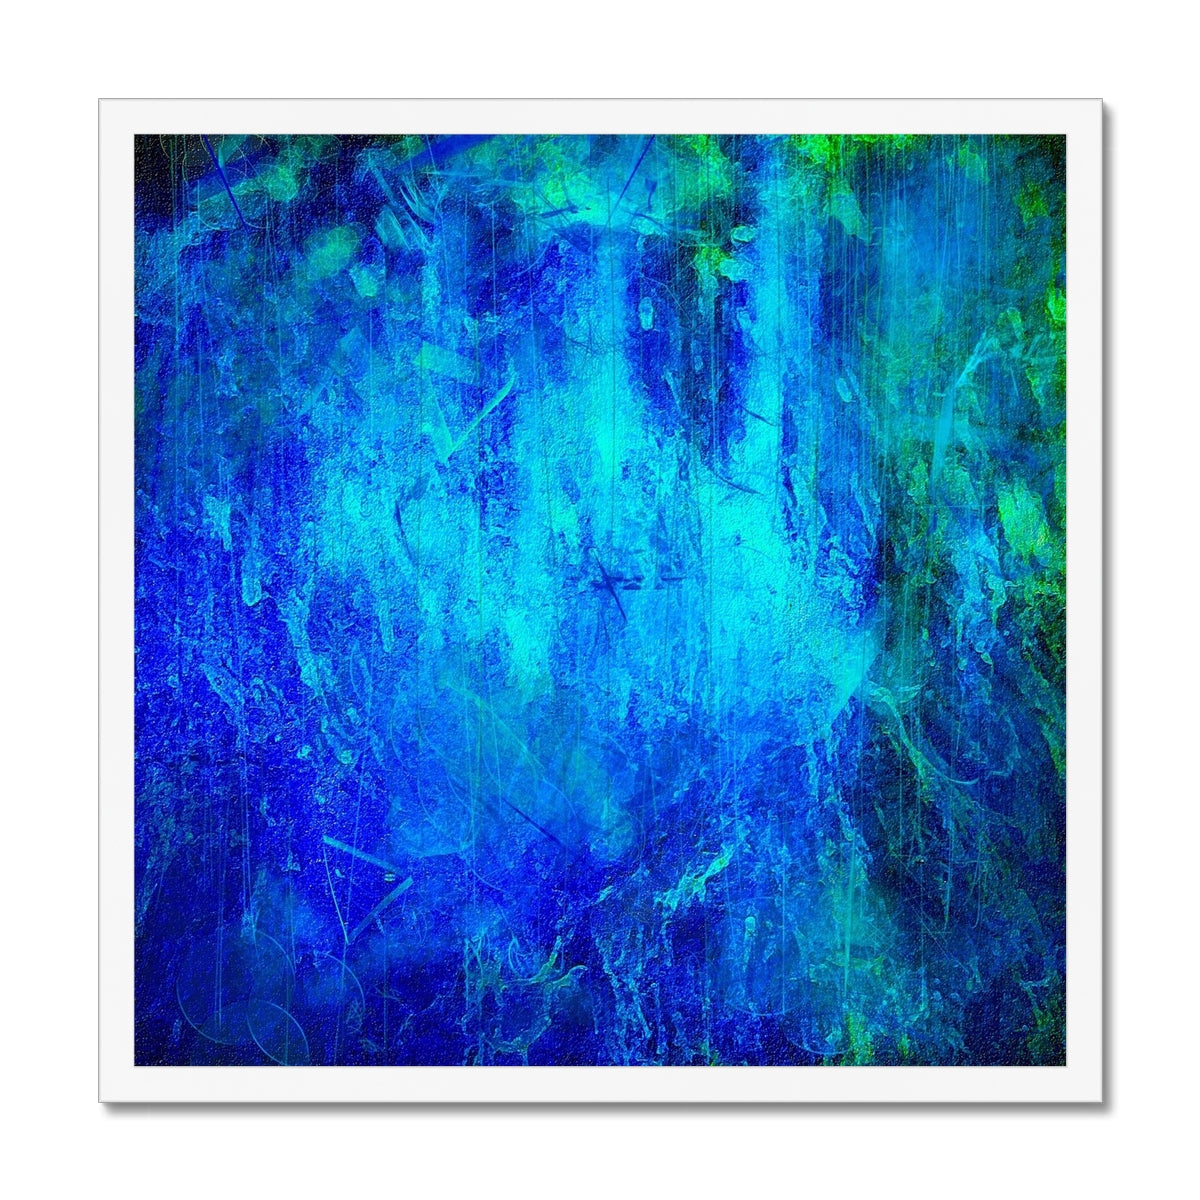 The Waterfall Abstract Painting | Framed Prints From Scotland-Framed Prints-Abstract & Impressionistic Art Gallery-20"x20"-White Frame-Paintings, Prints, Homeware, Art Gifts From Scotland By Scottish Artist Kevin Hunter